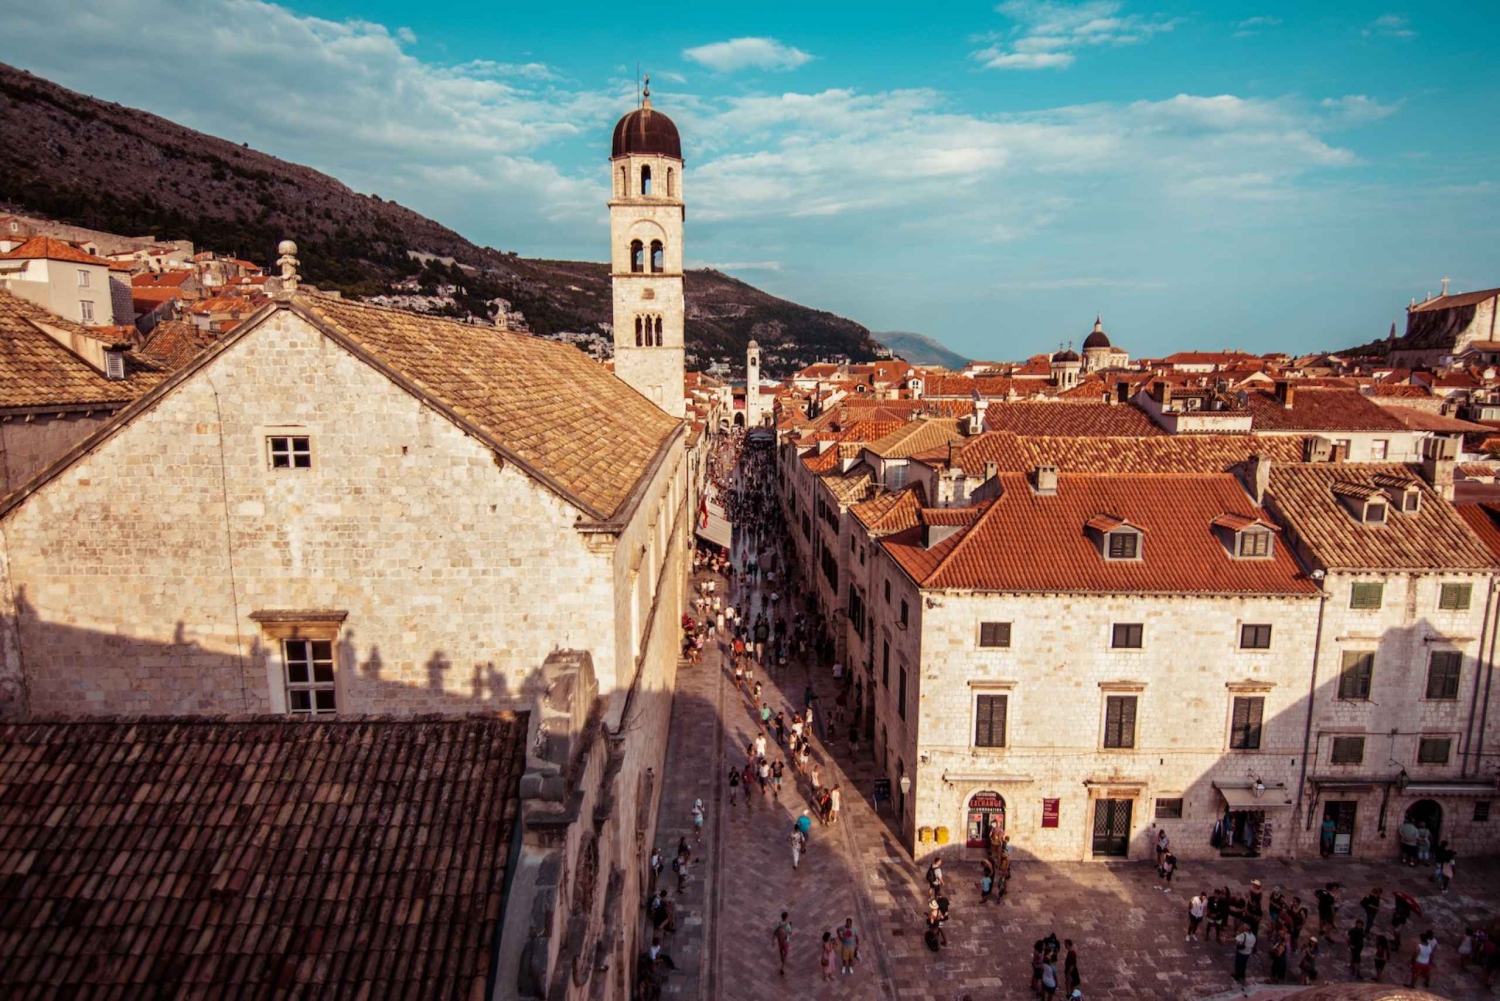 Dubrovnik: Old Town & City Walls Guided Tours Combo Ticket